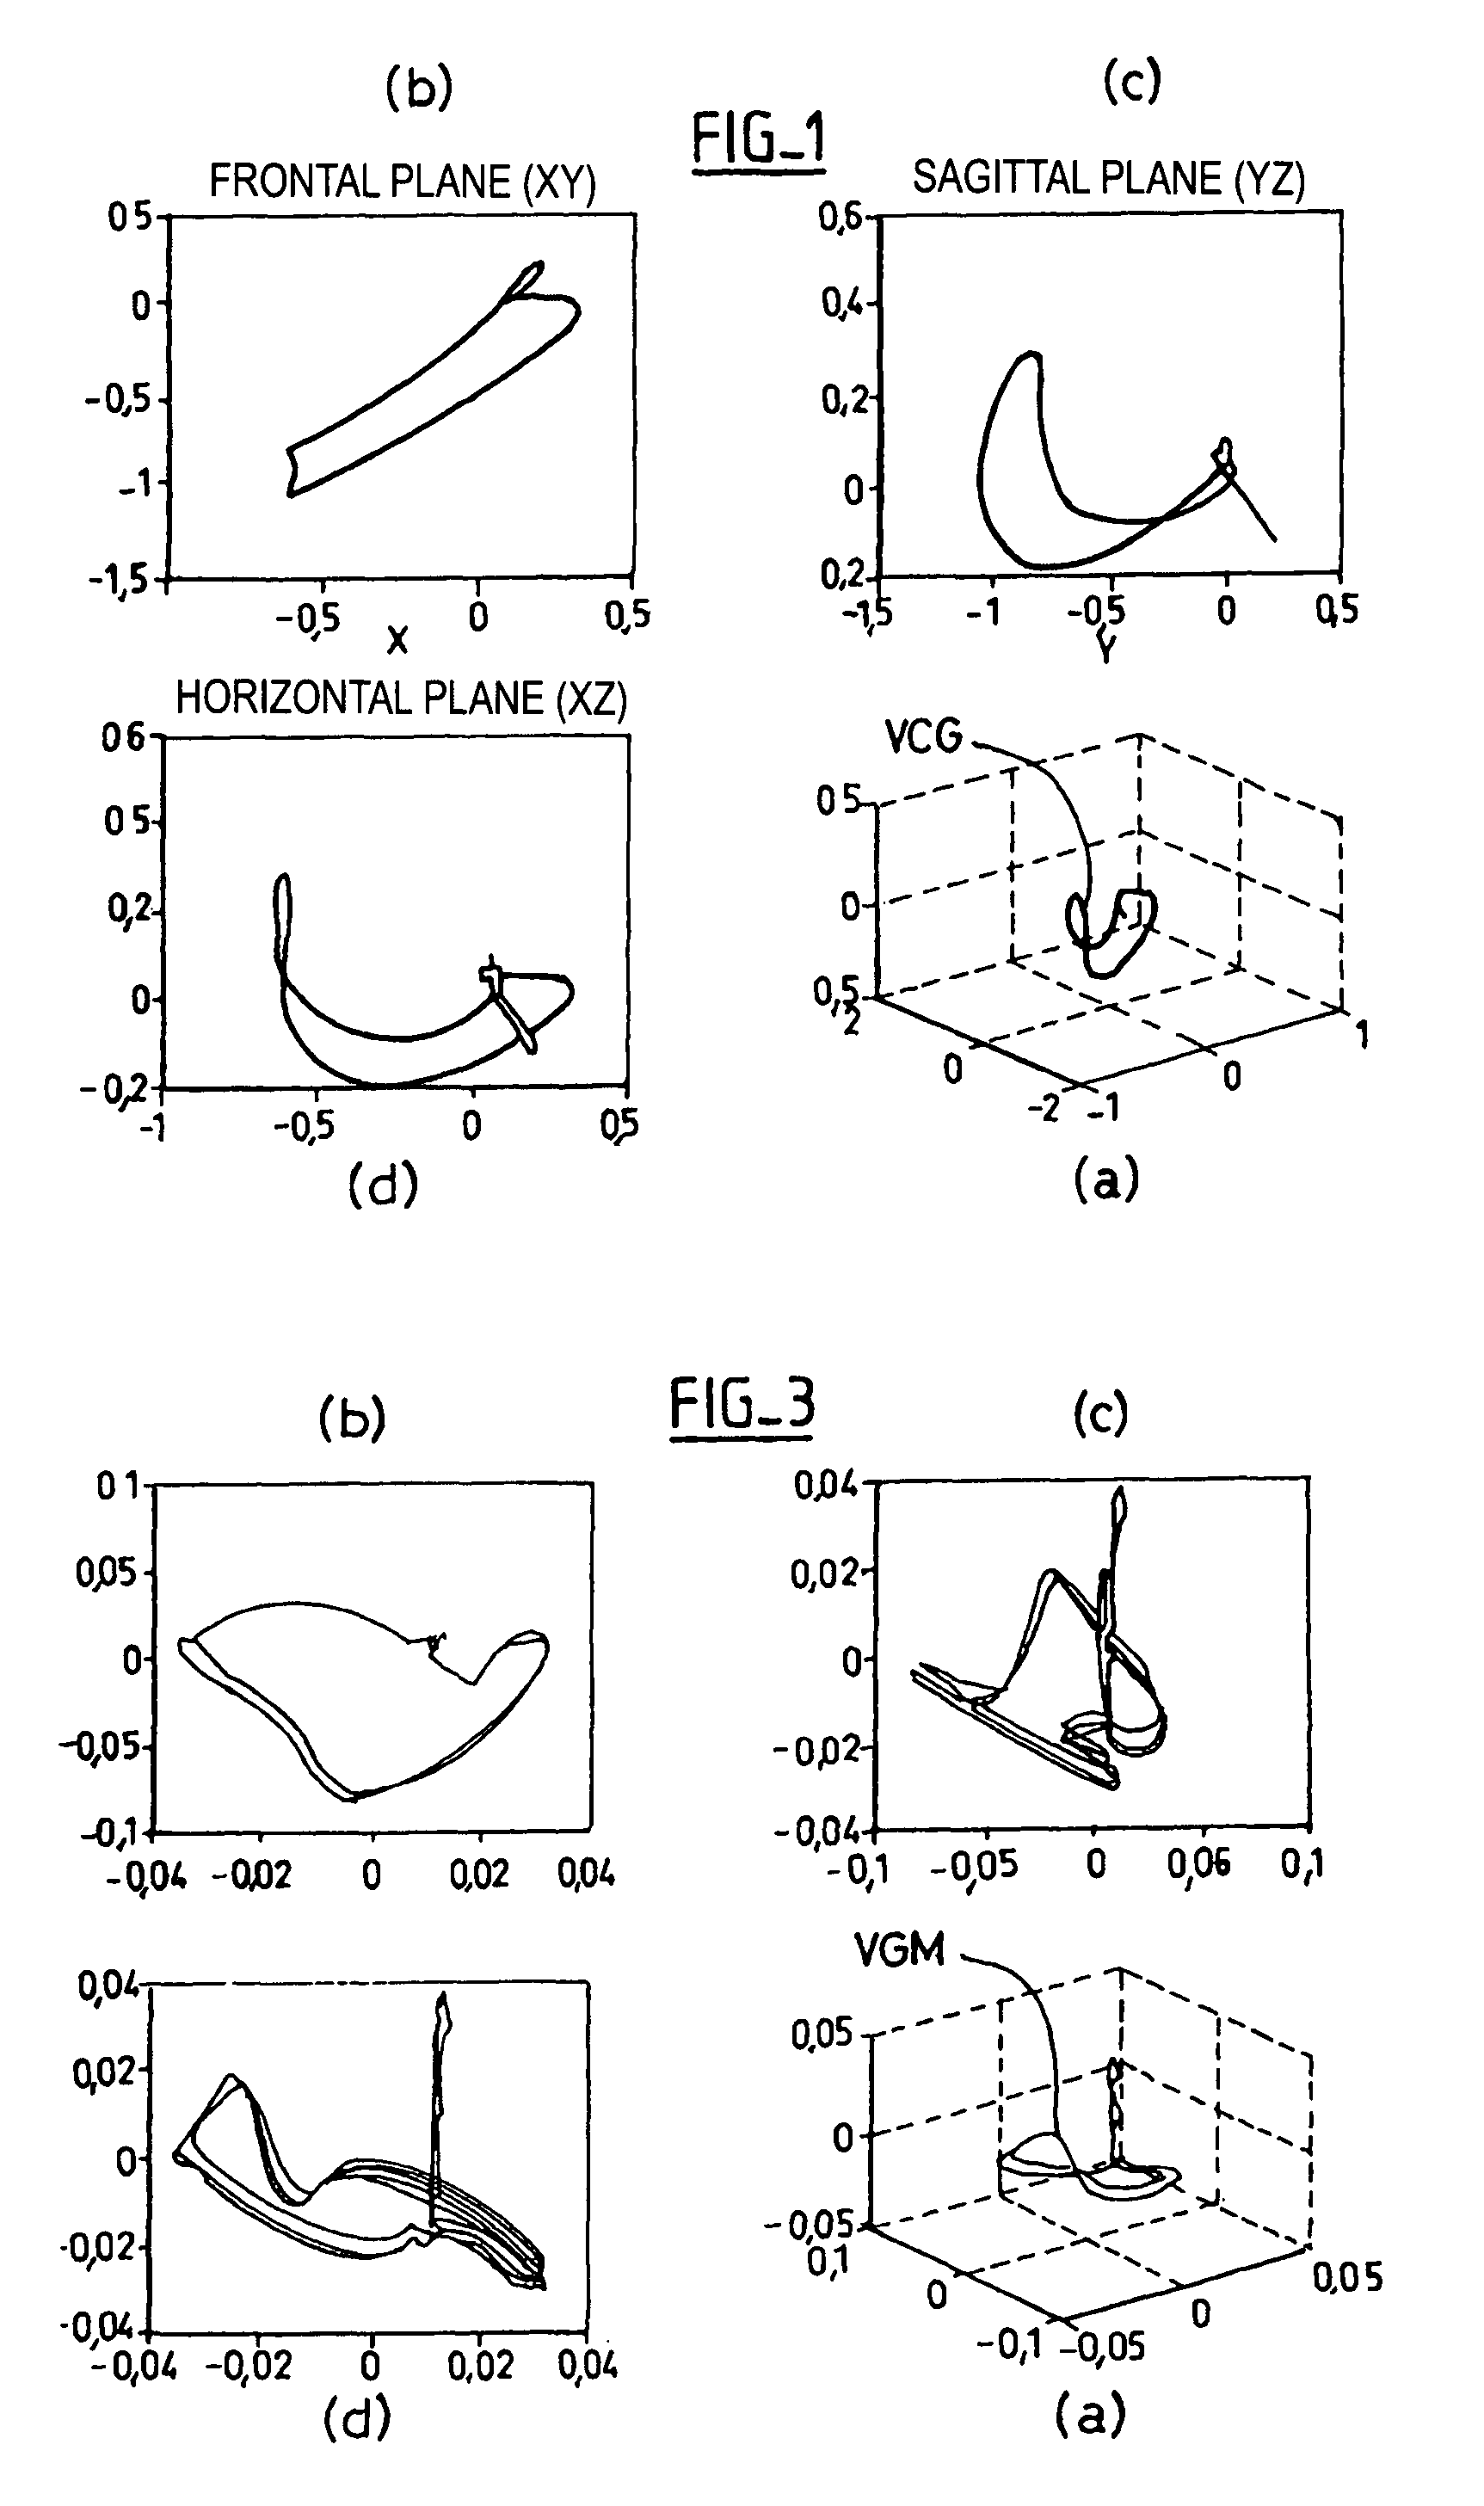 Reconstruction of a surface electrocardiogram based upon an endocardial electrogram